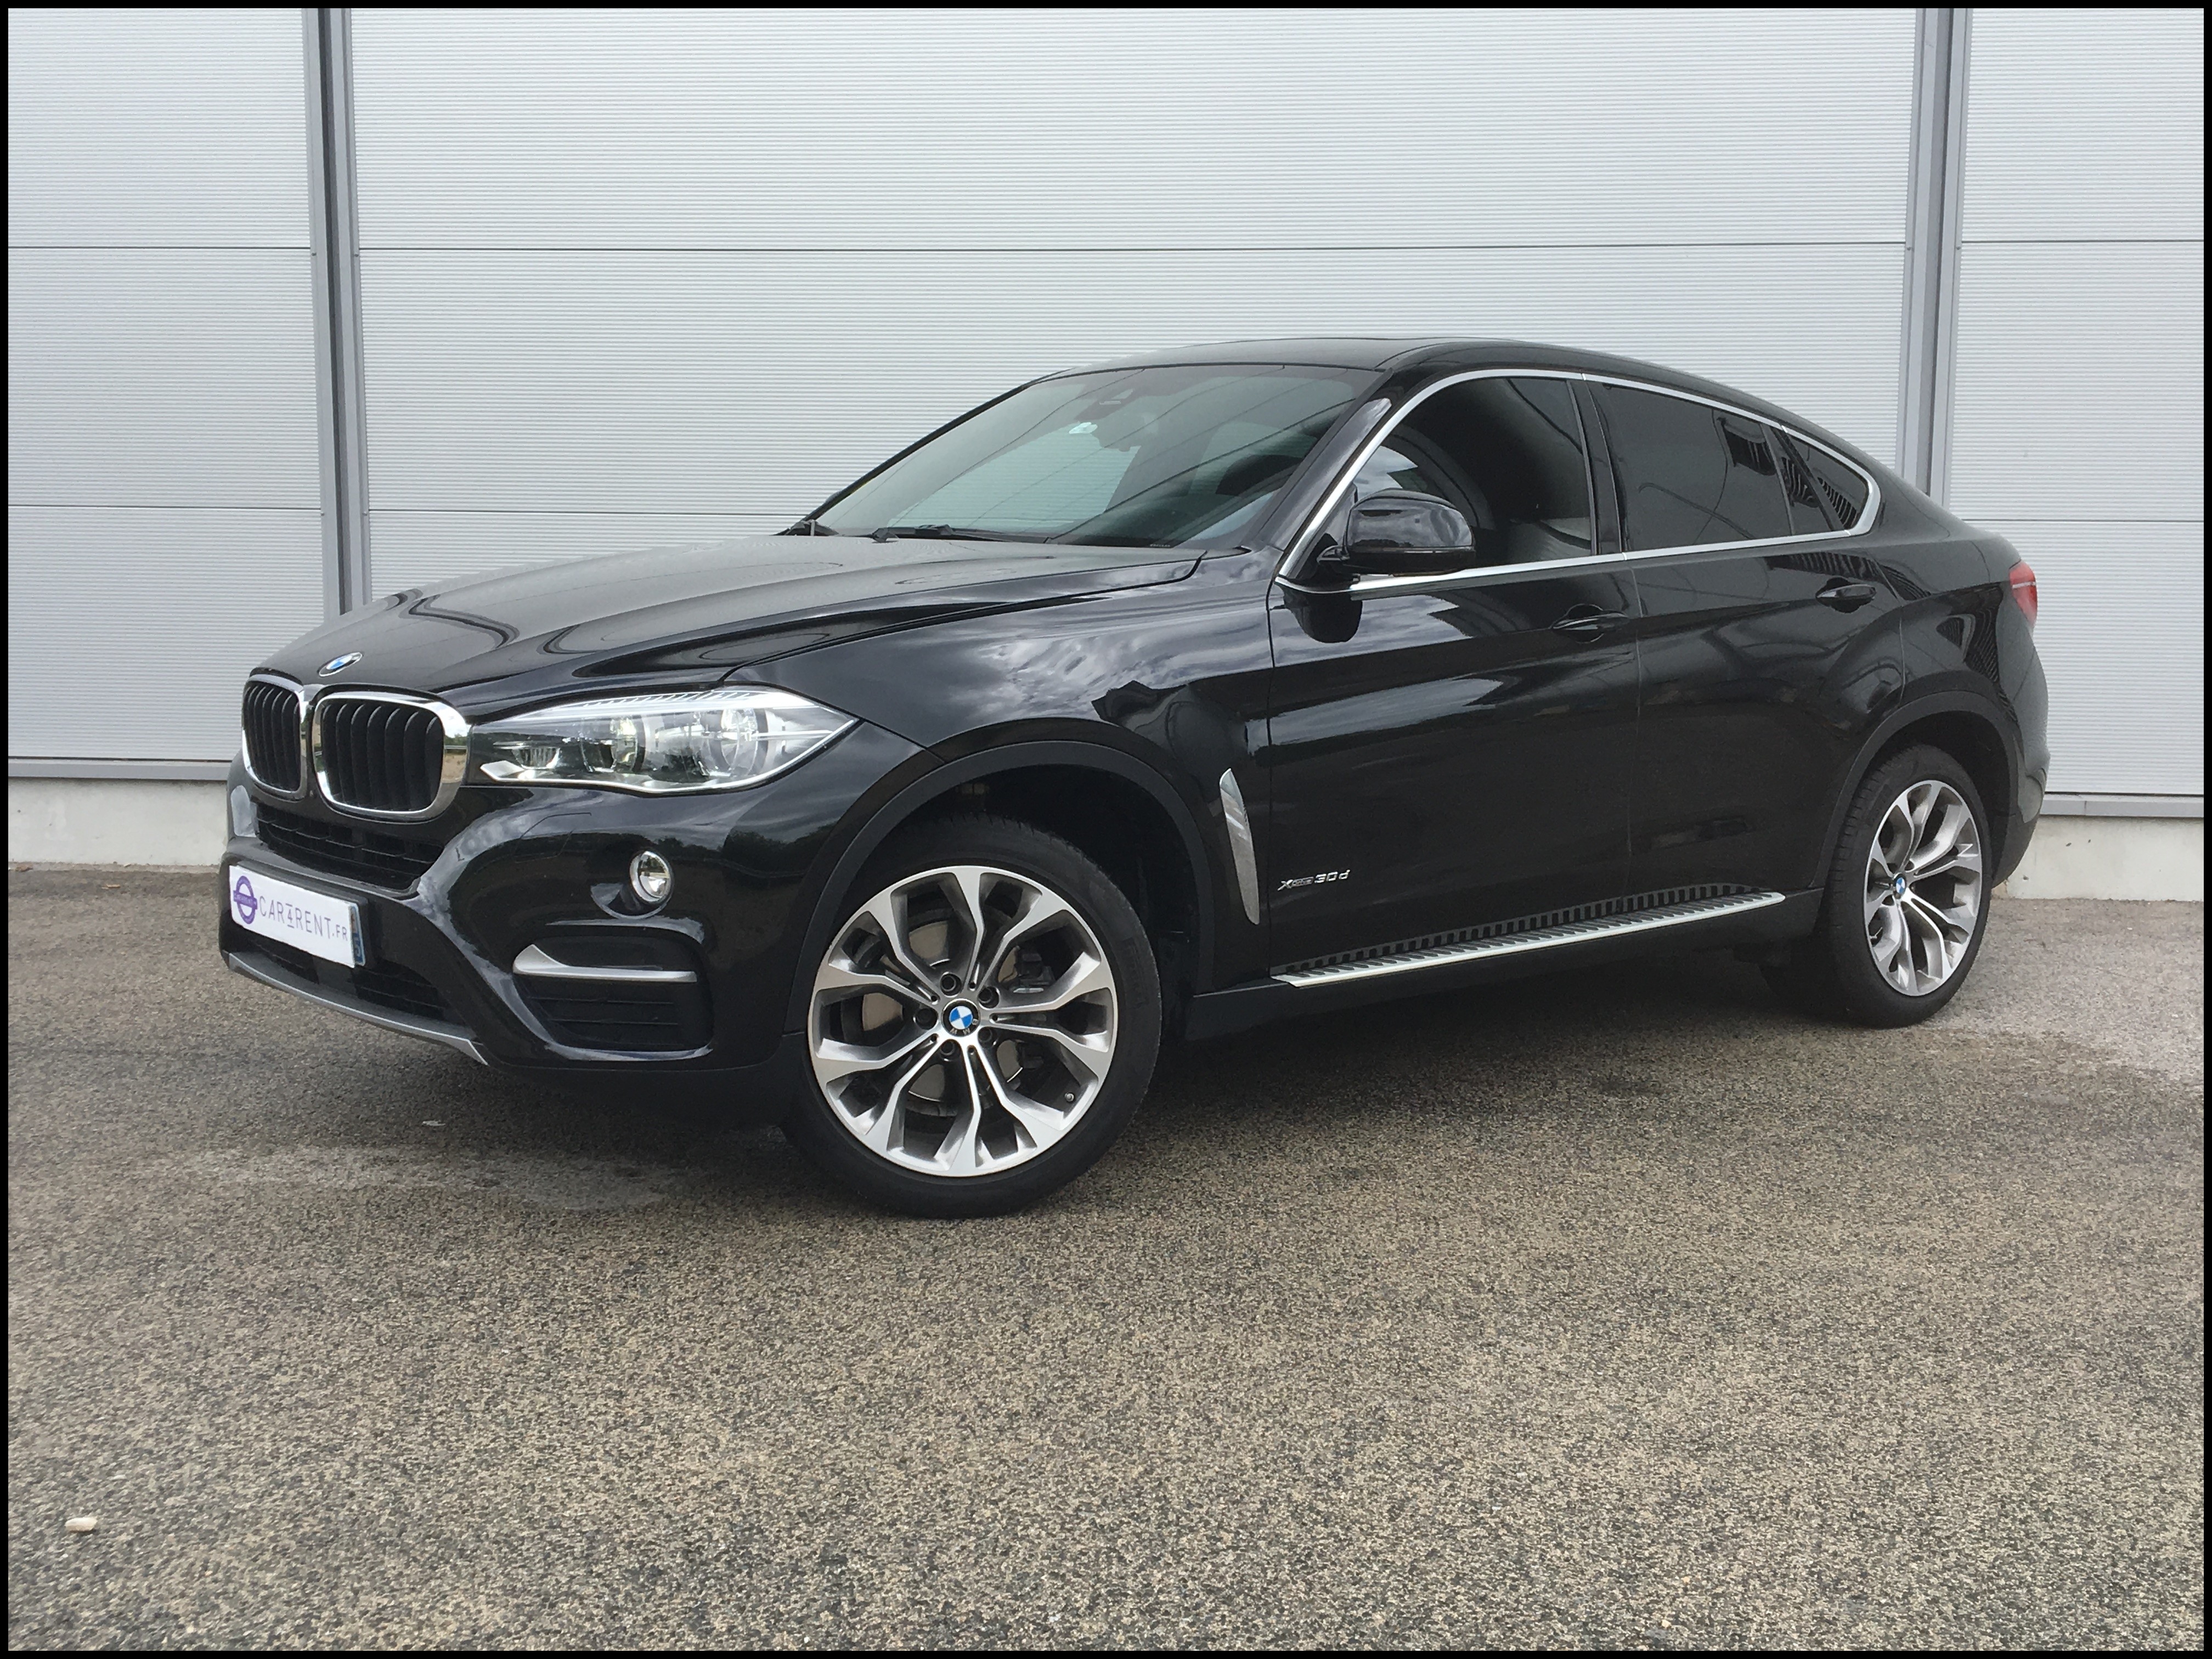 BMW X6 rental Cannes thanks to Car4rent